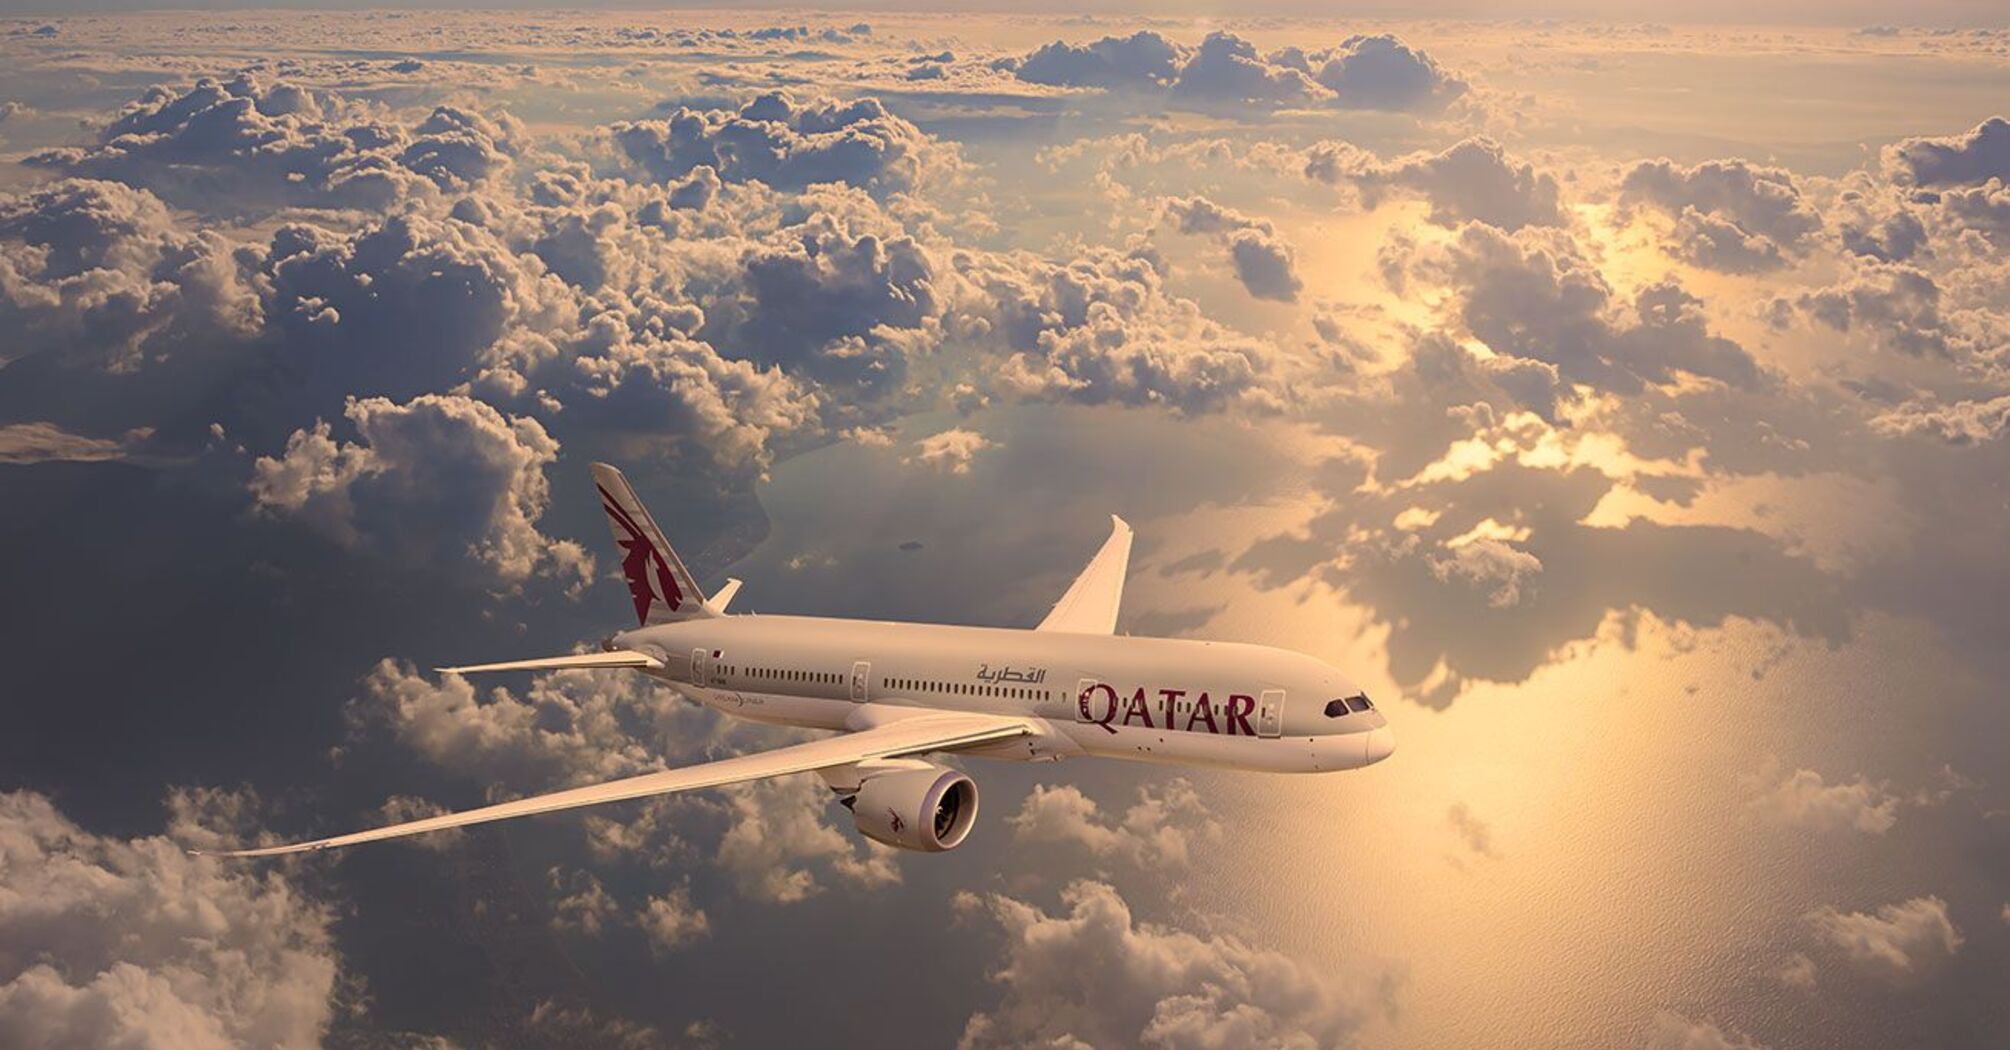 5 facts about the best business class from Qatar Airways